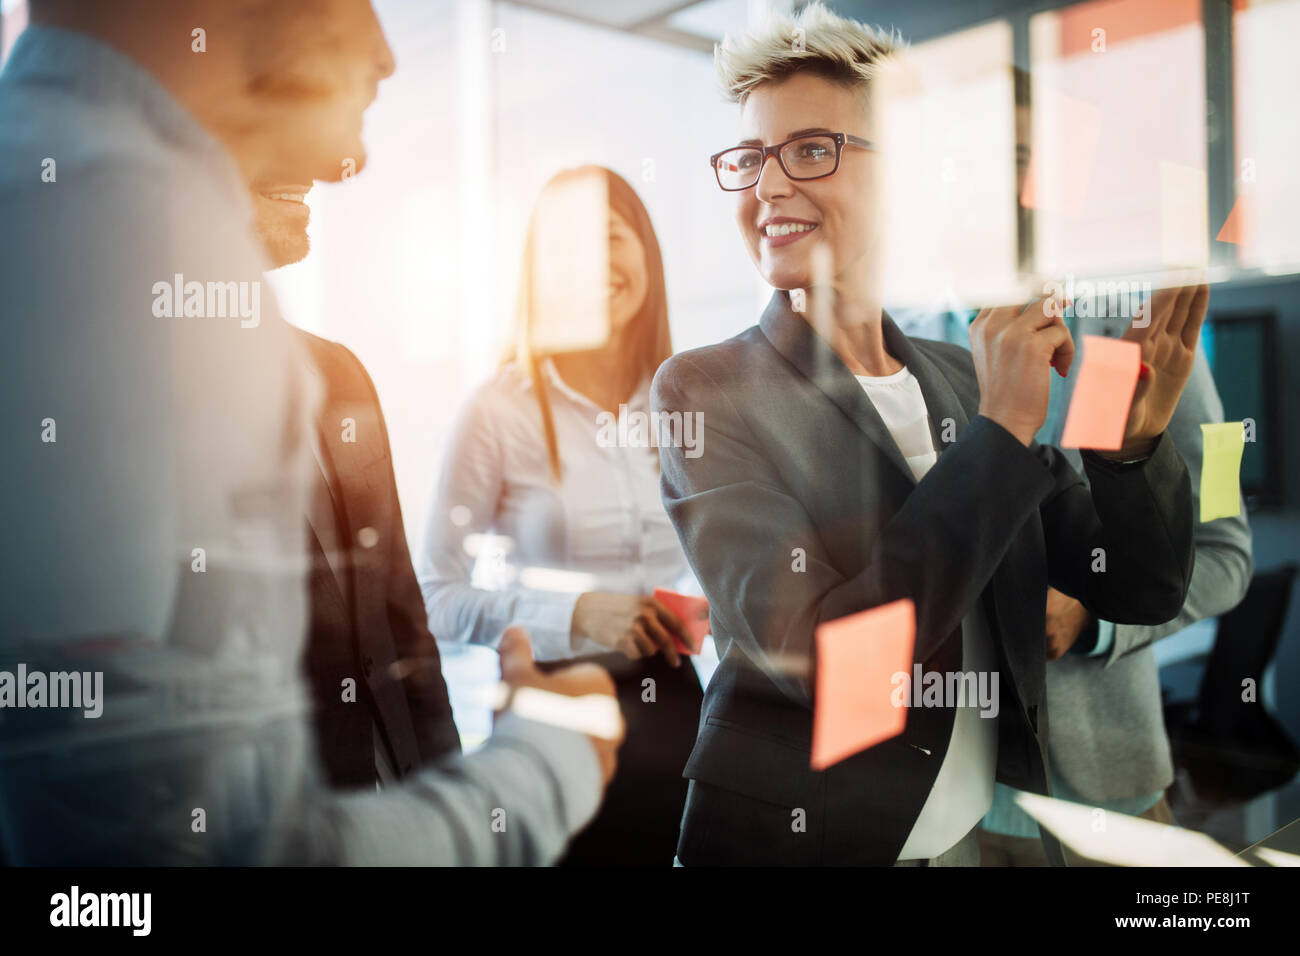 Business people planning strategy in office together Stock Photo